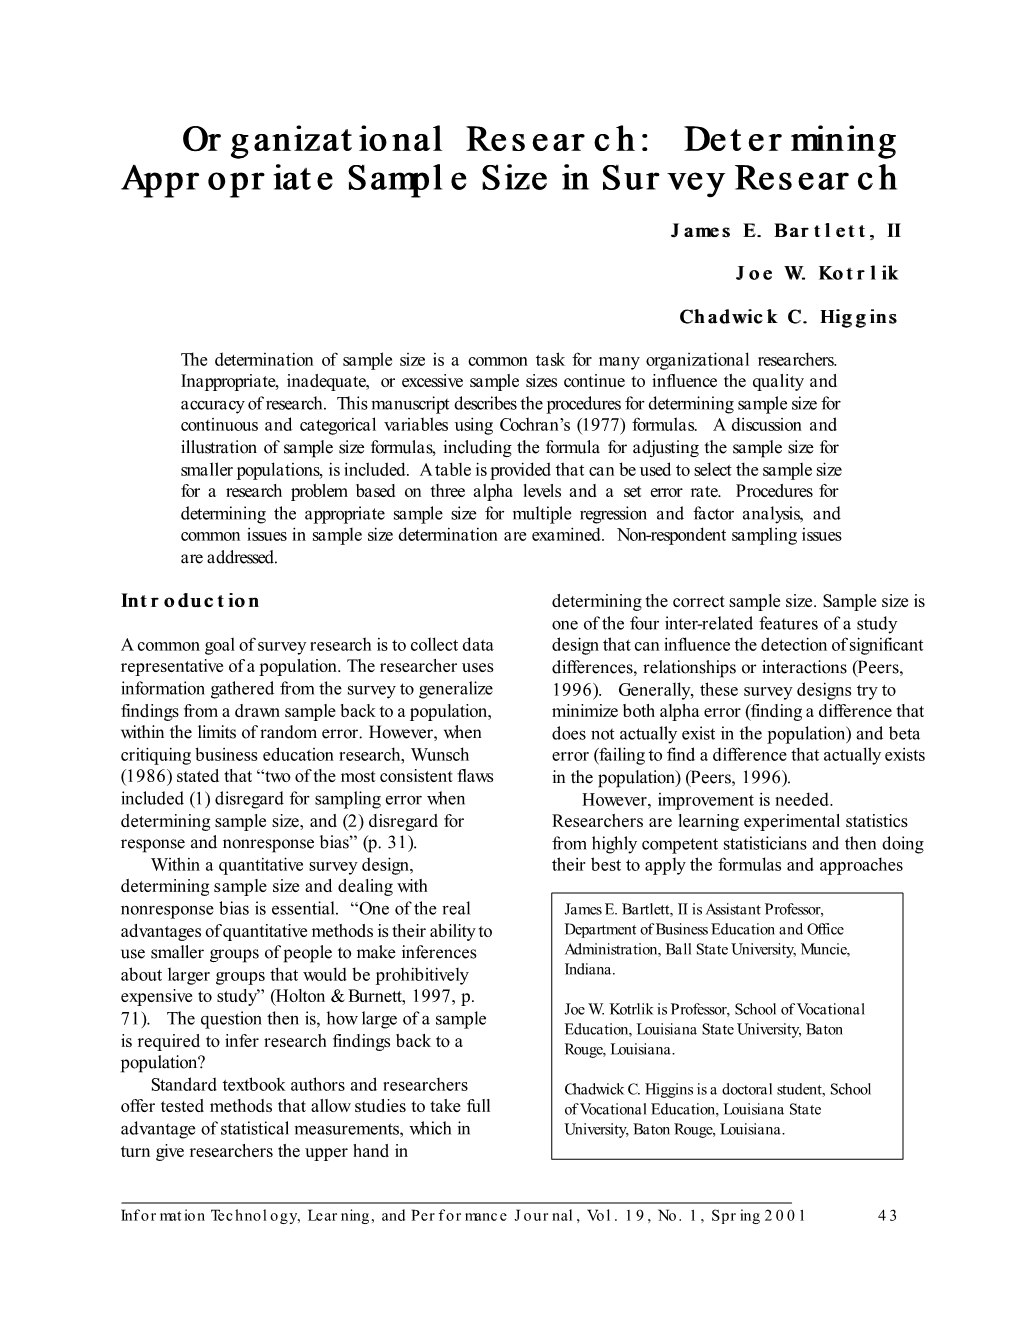 Determining Appropriate Sample Size in Survey Research